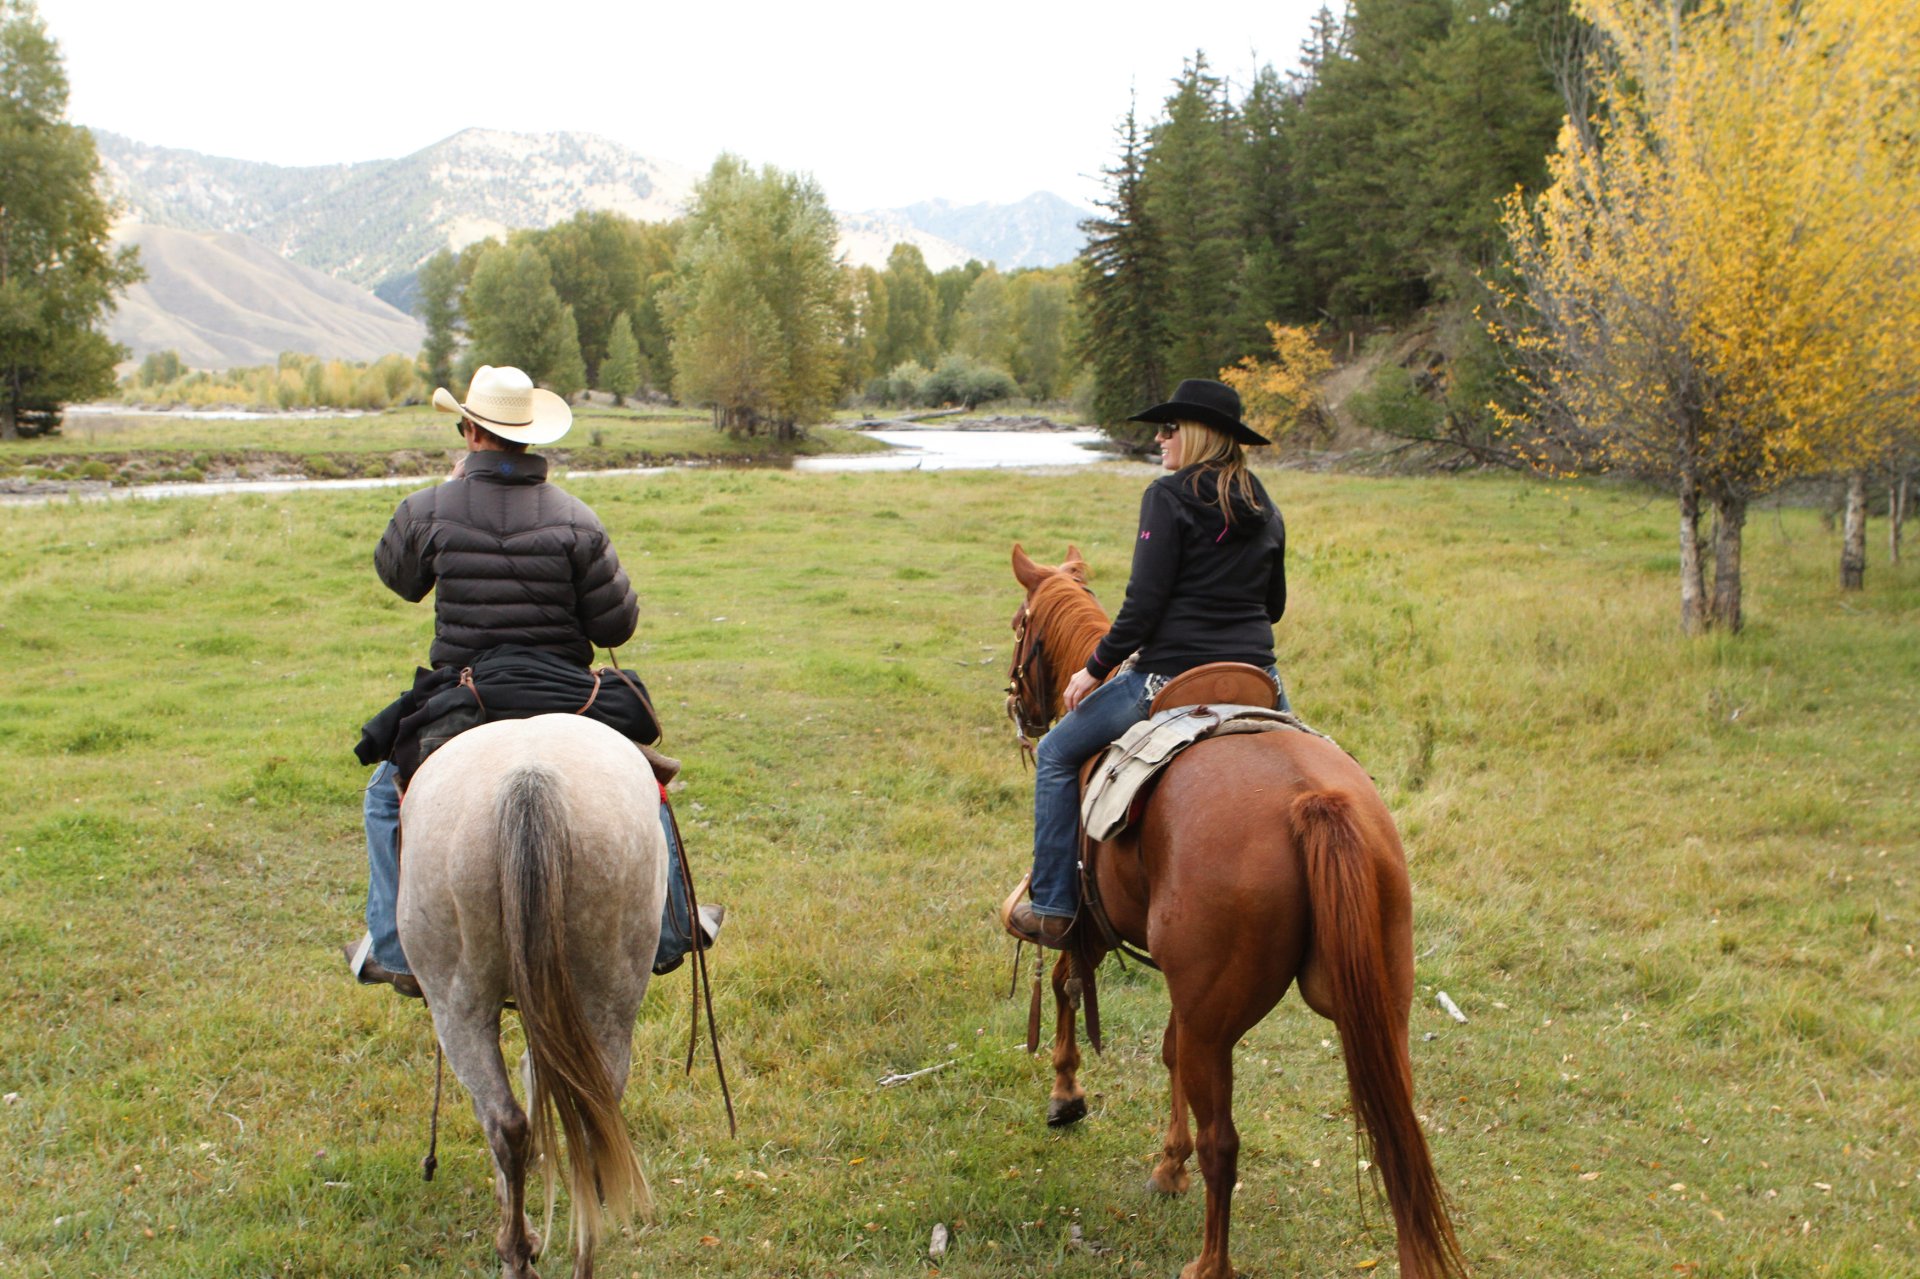 Horseback riding in Jackson Hole tow riders on gray and chestnut horses